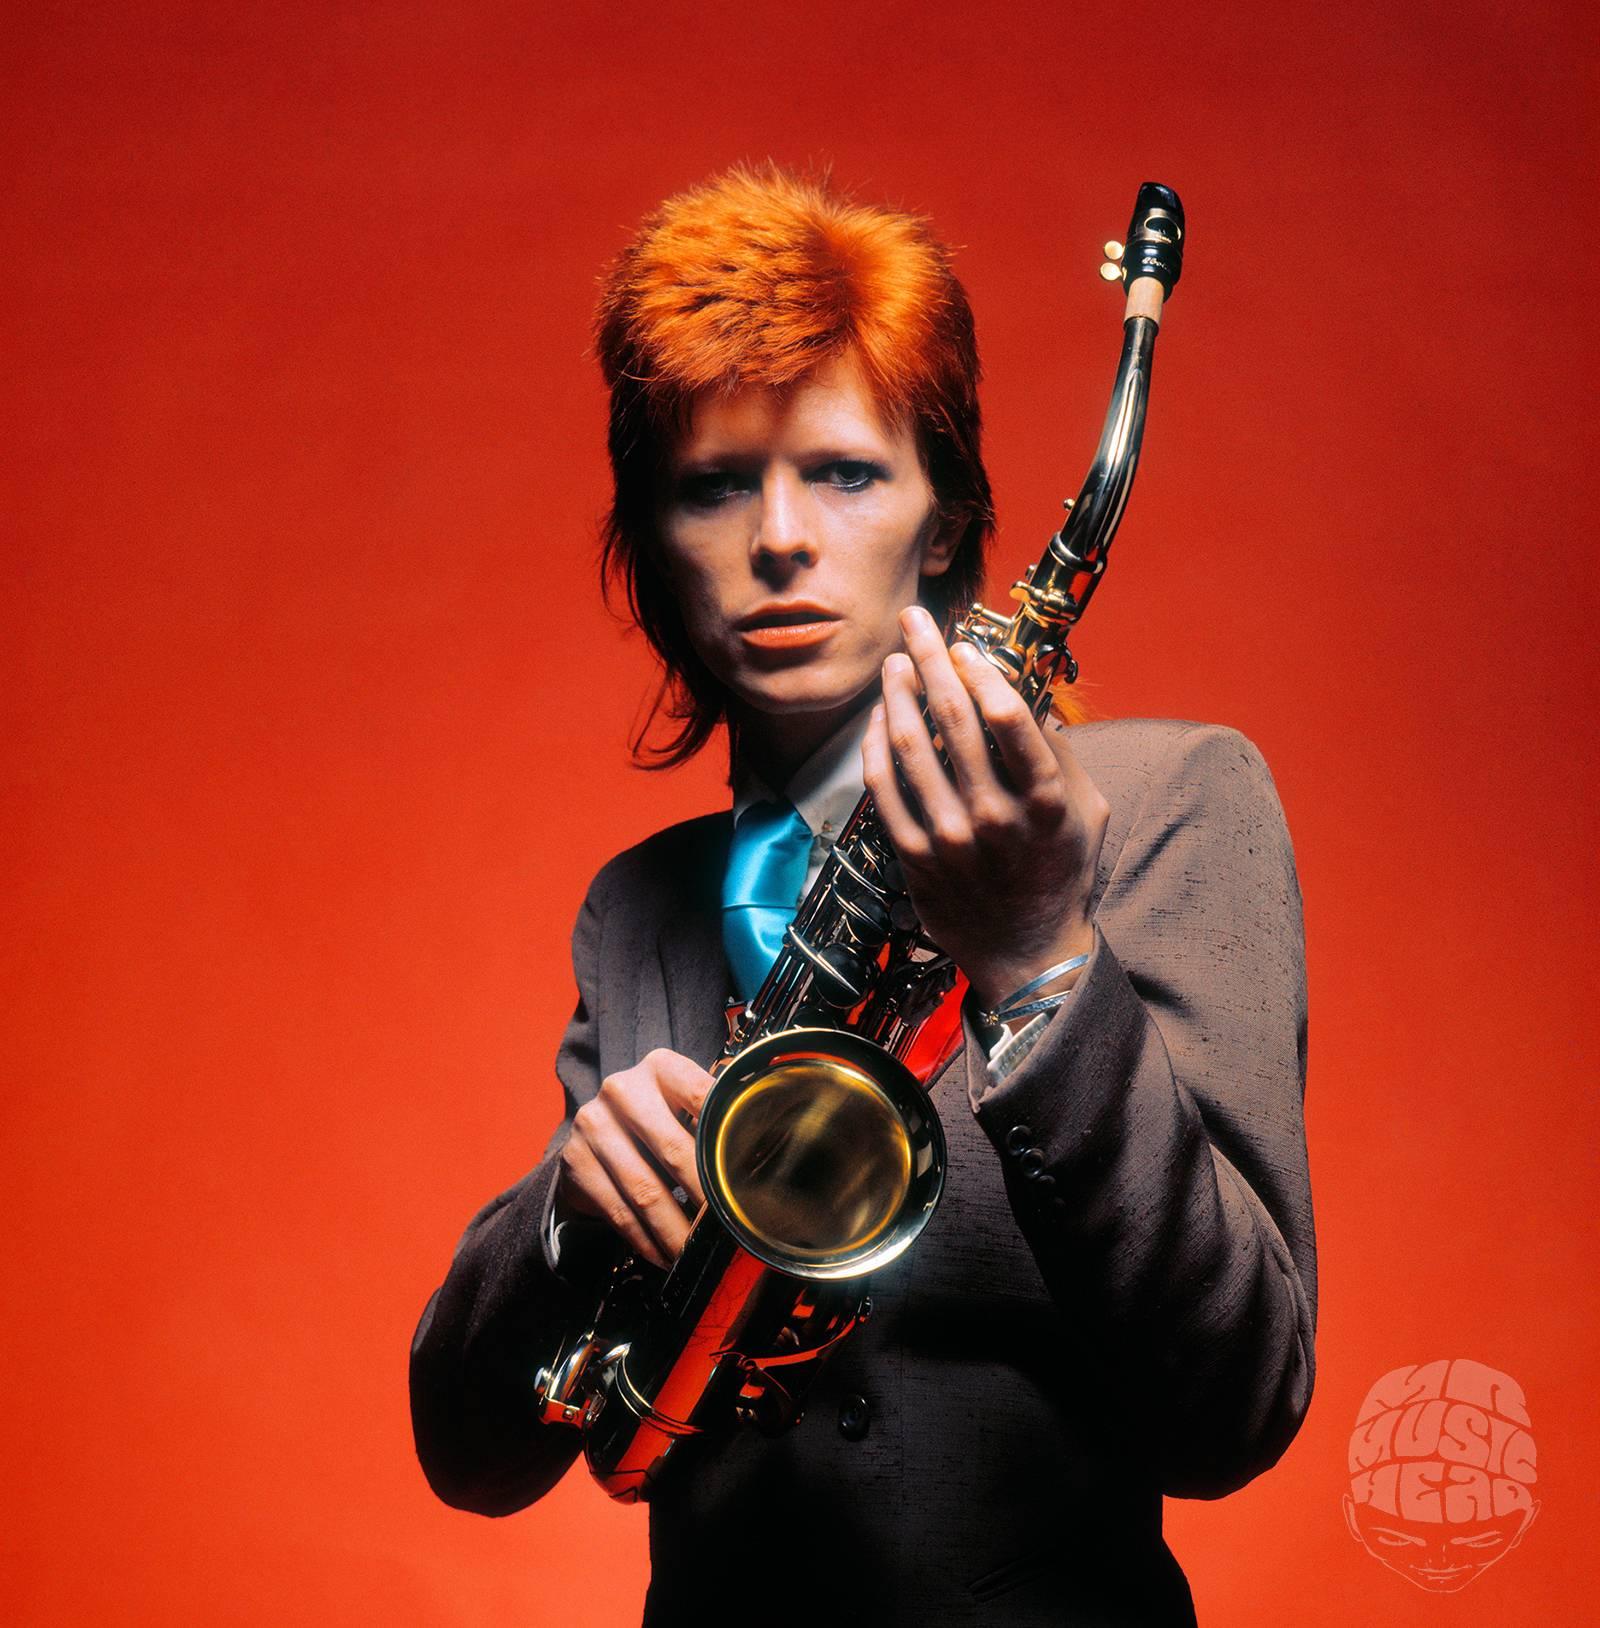 David Bowie posing with a saxophone, shot by Mick Rock in 1973. Bowie began playing the saxophone as a child went on to play the instrument on a number of his songs.

16 x 20 inches
Edition of 90

Mick Rock is often referred to as “The Man Who Shot